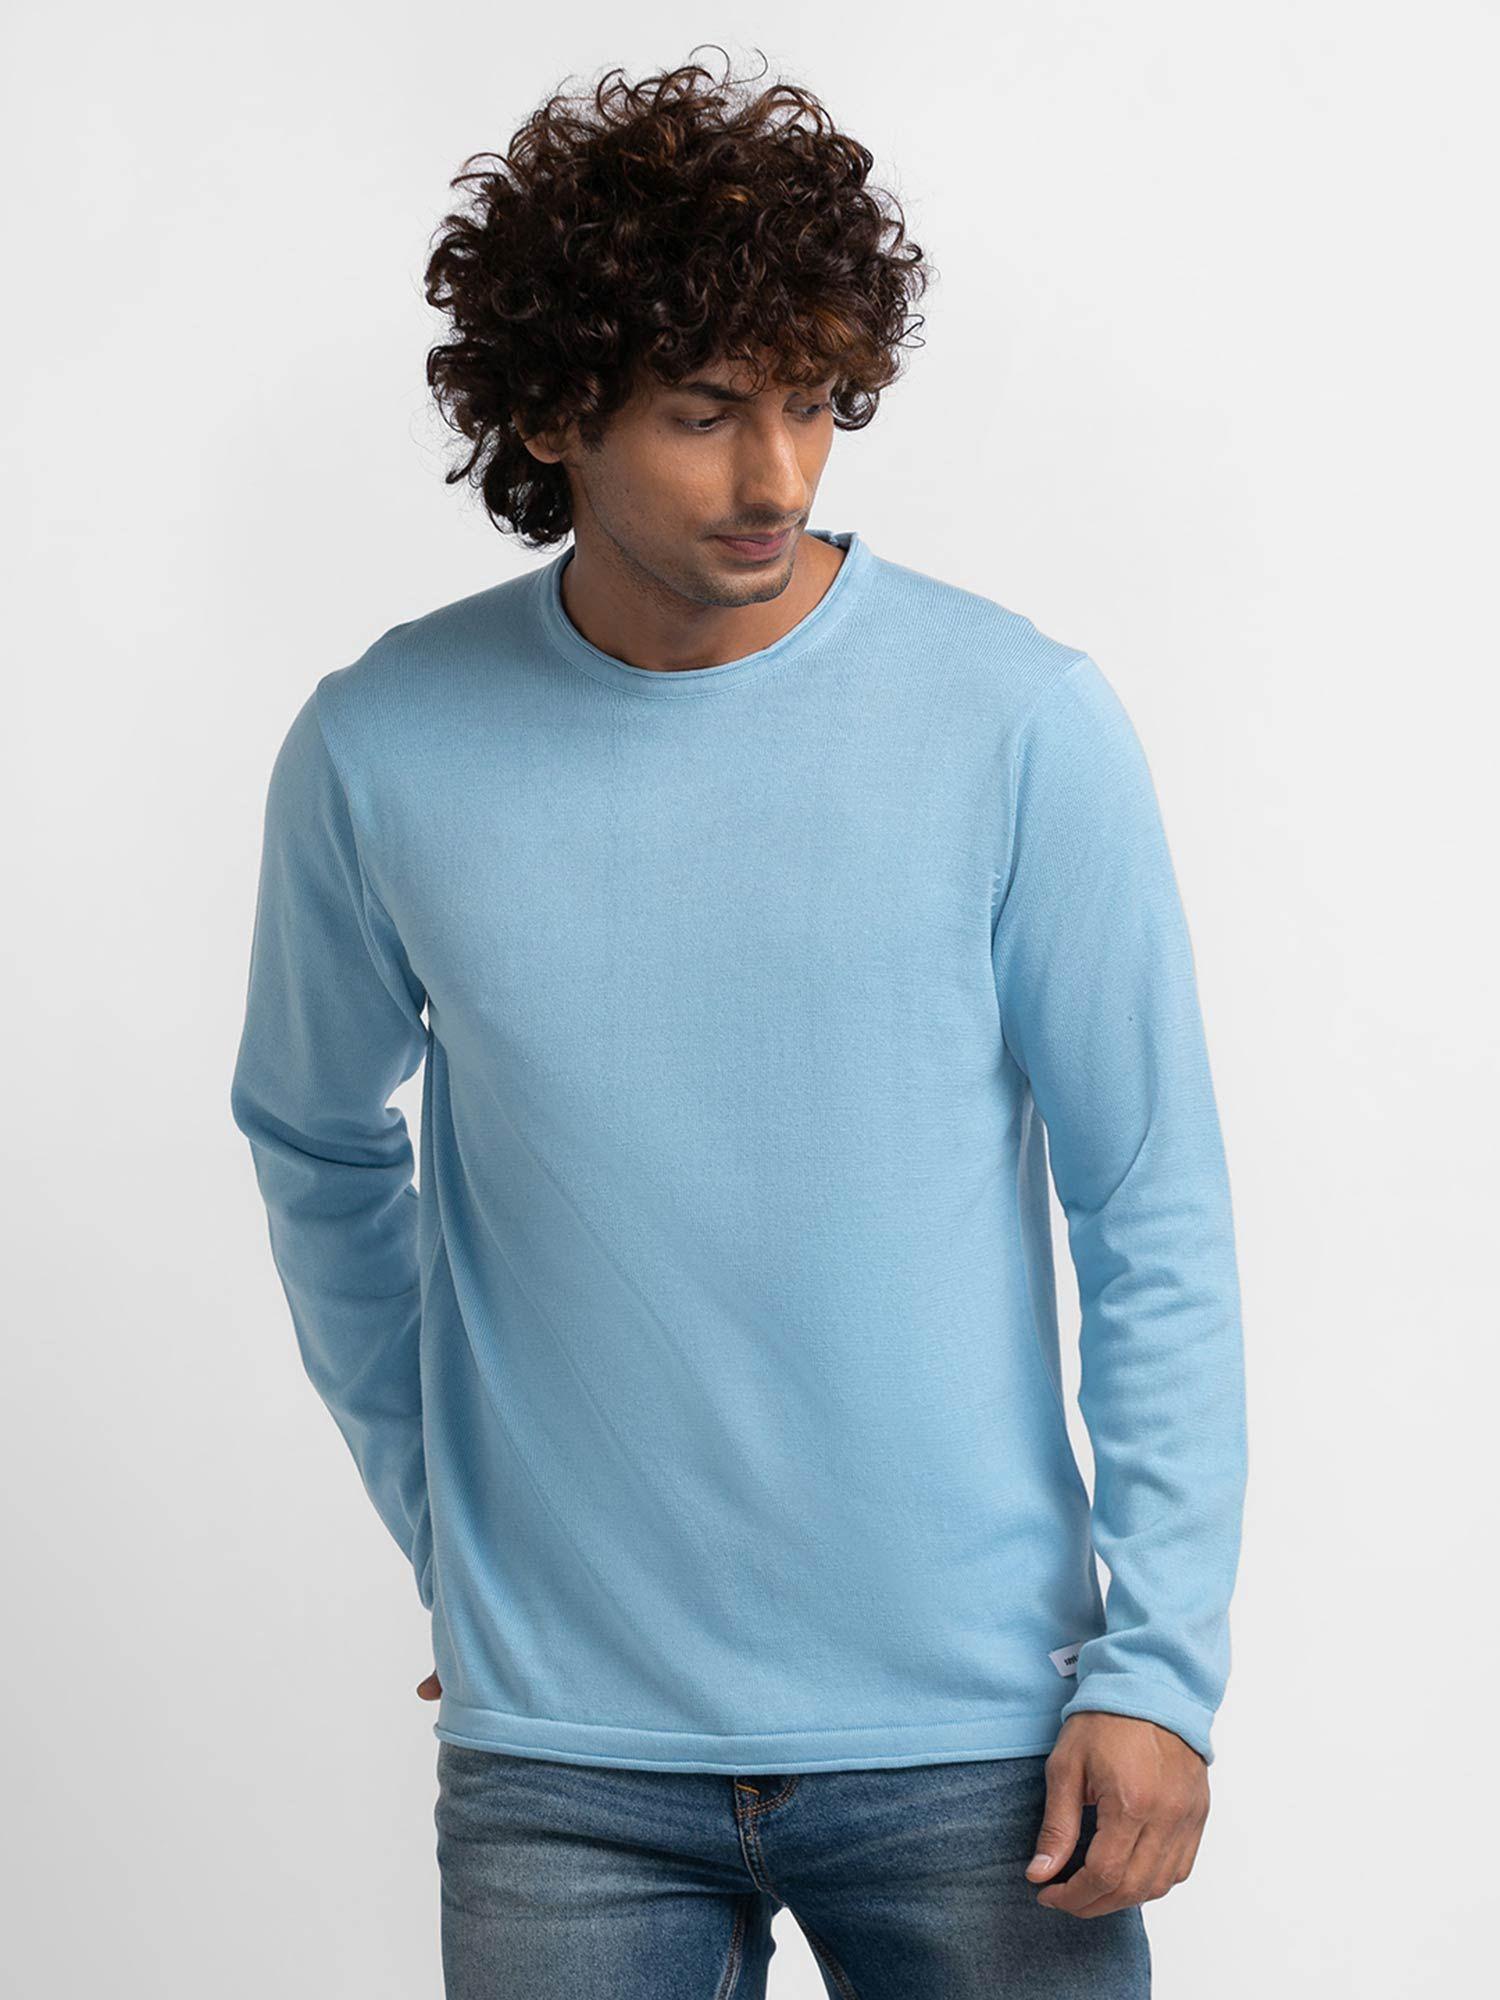 sky-blue-cotton-full-sleeve-casual-sweater-for-men